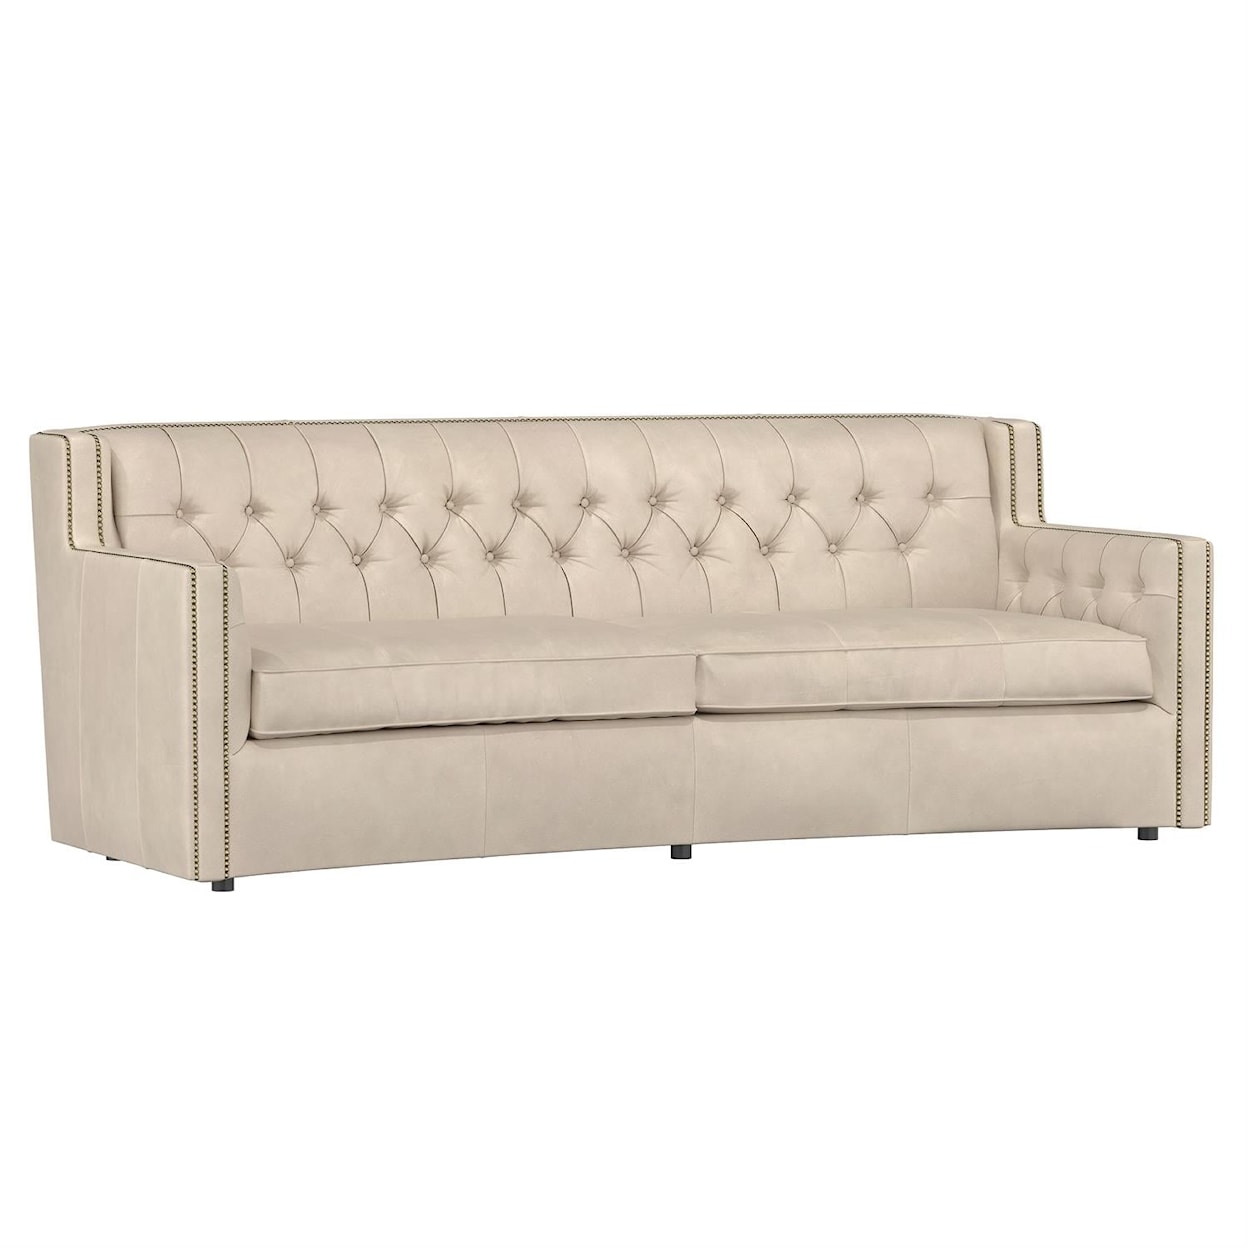 Bernhardt Candace Leather Sofa without Pillows